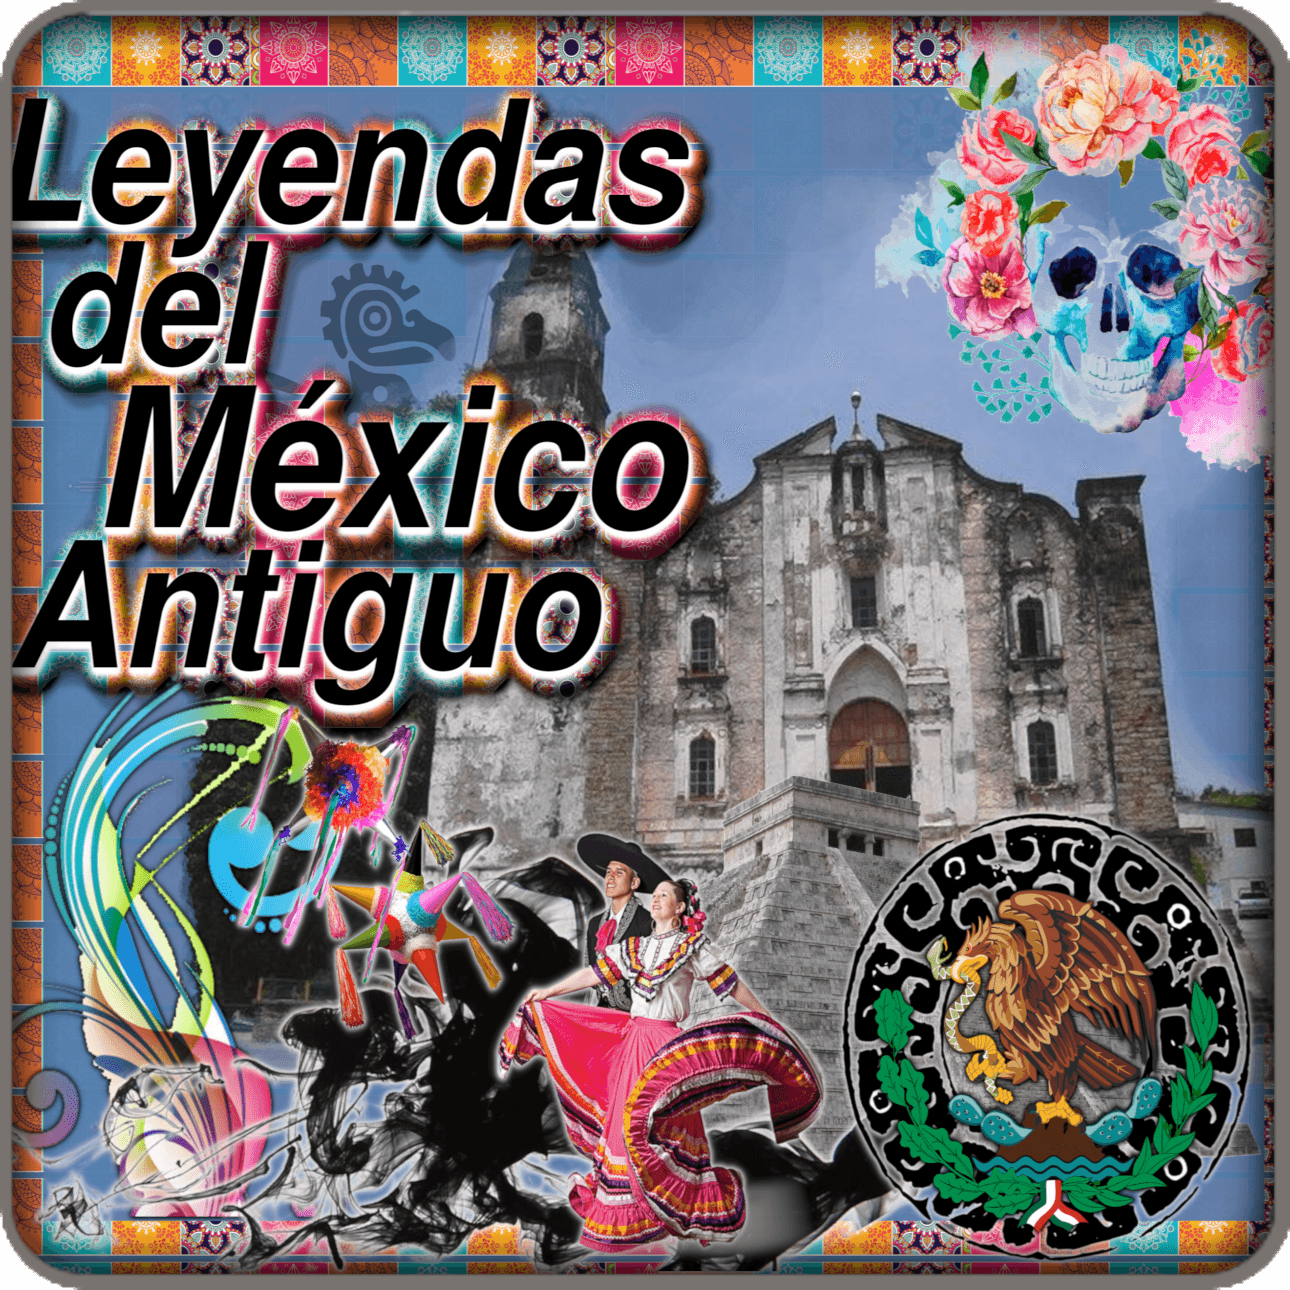 Legends of Ancient Mexico